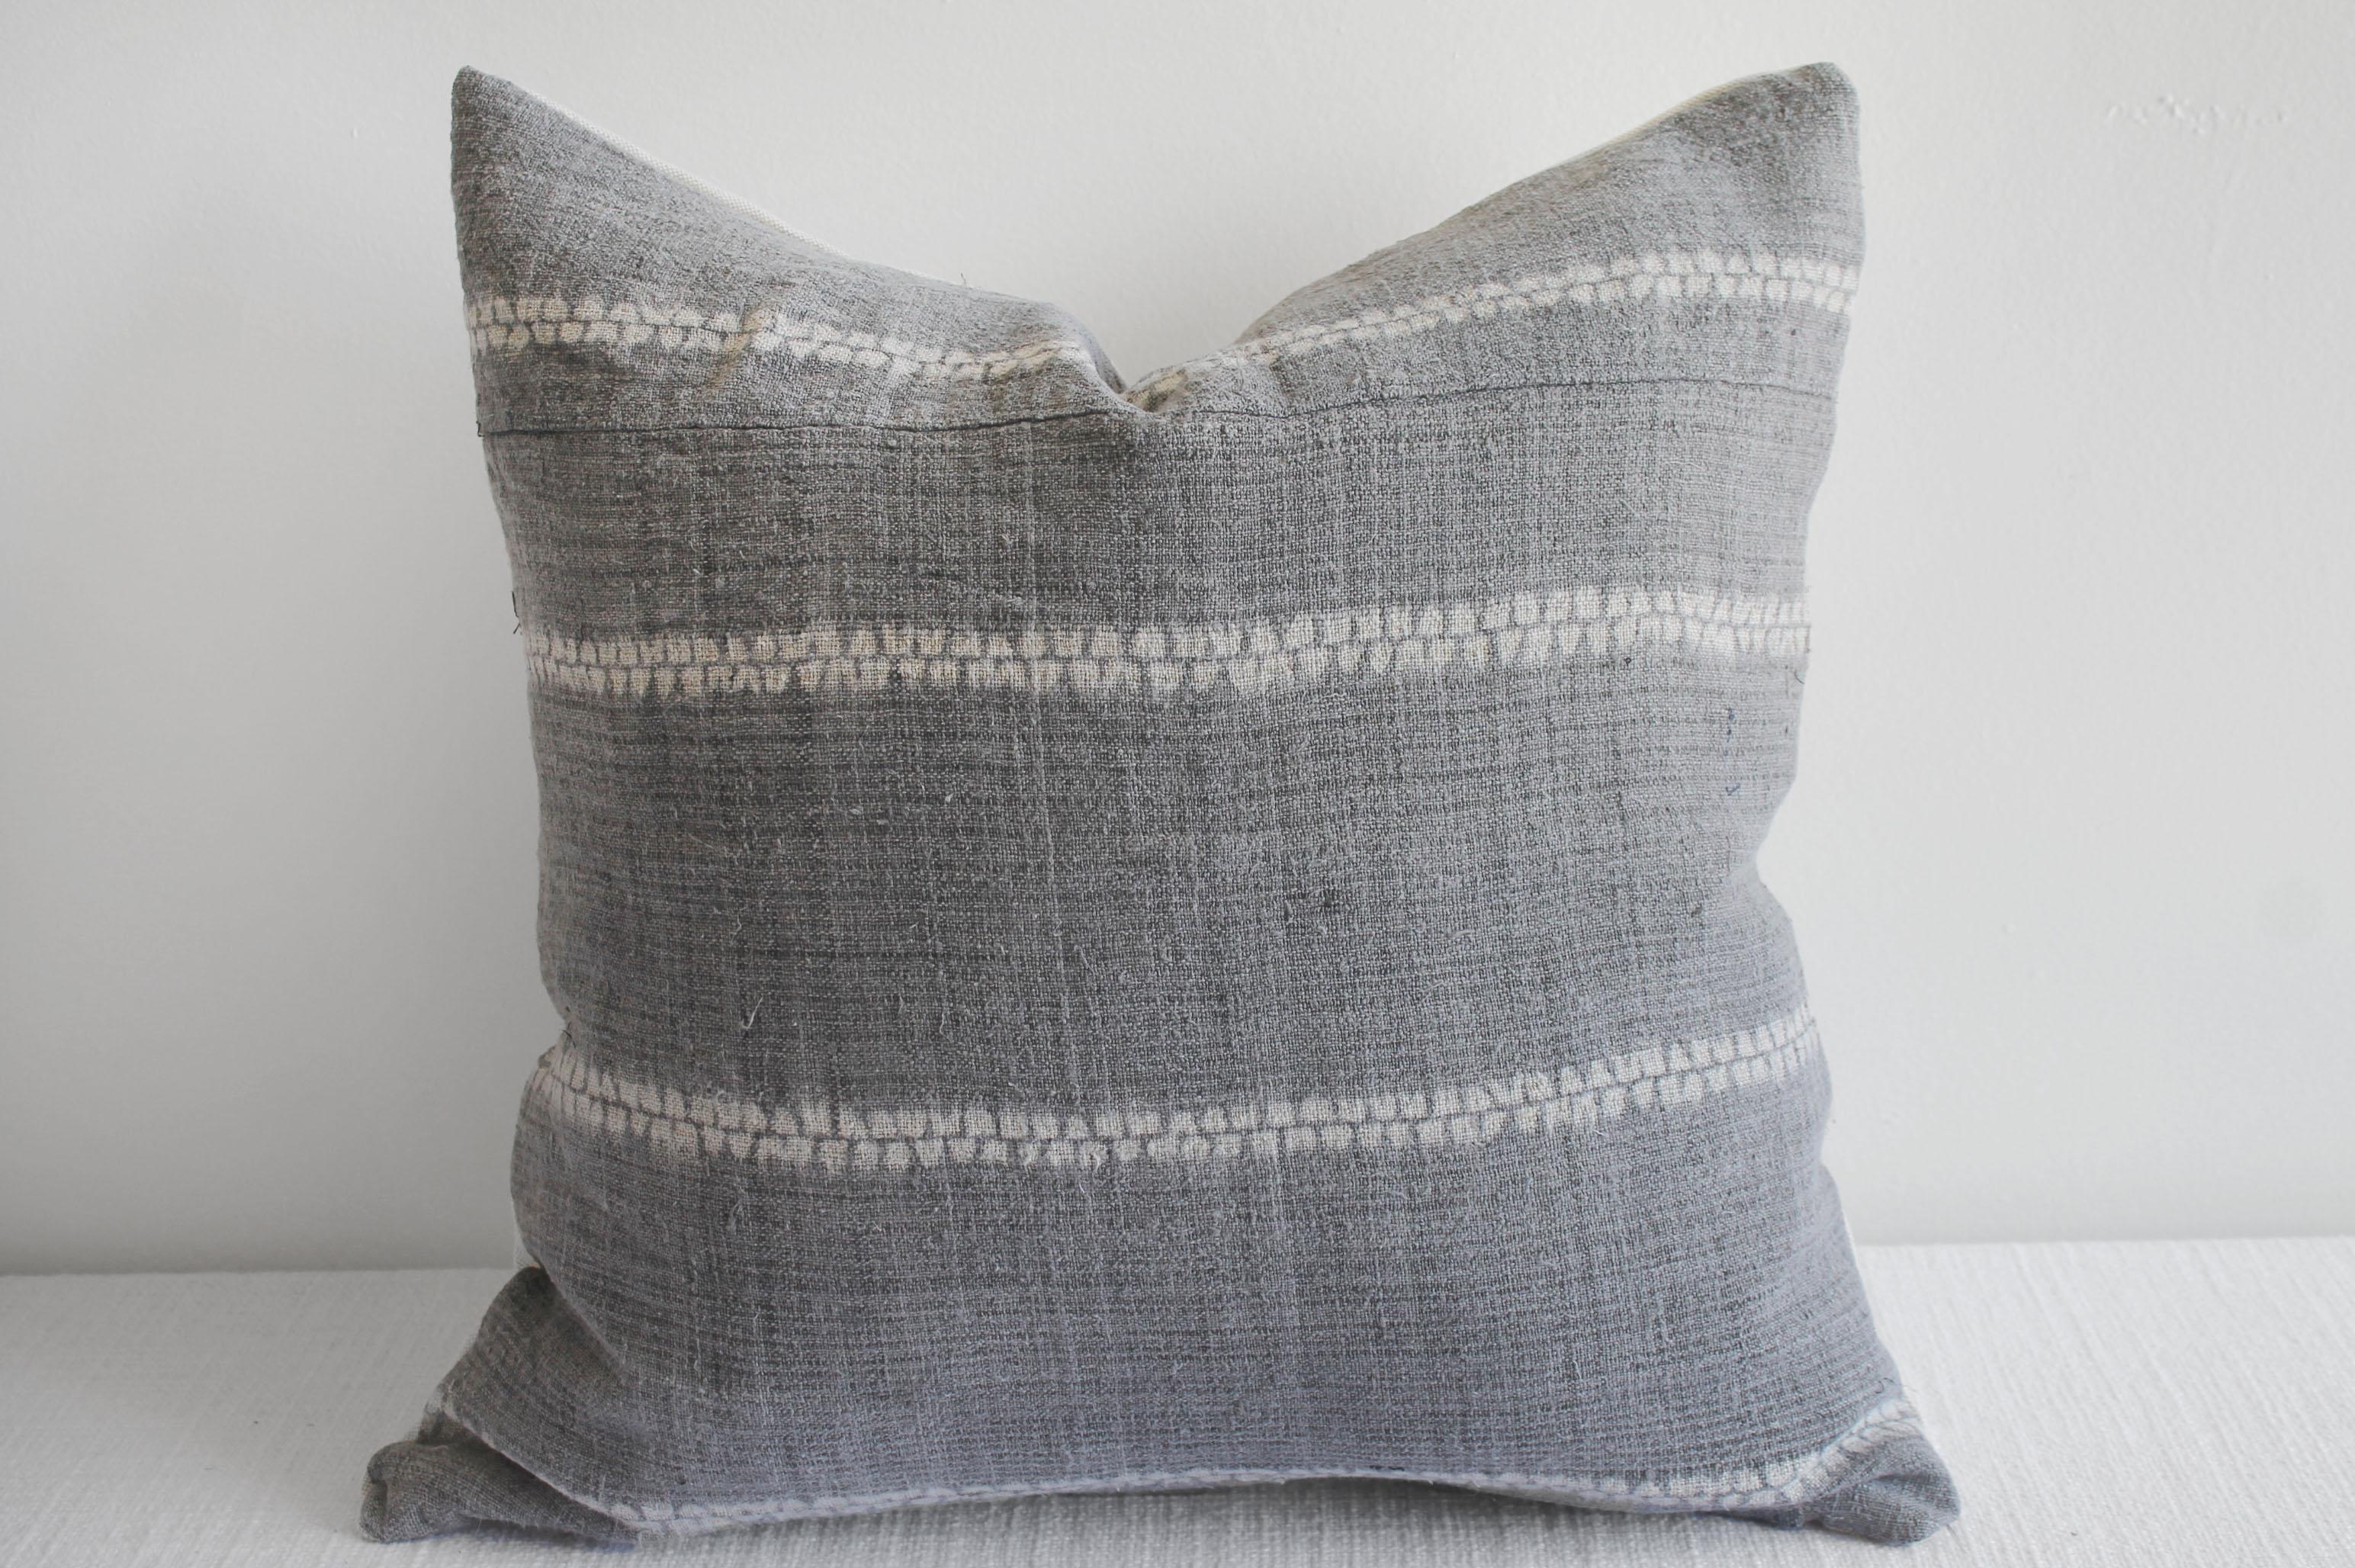 Vintage woven linen pillow in gray and creamy white, the backing is 100% Irish linen in natural linen. Our pillows are constructed with vintage one of a kind textiles from around the globe. Carefully constructed with the finest linens, with hidden